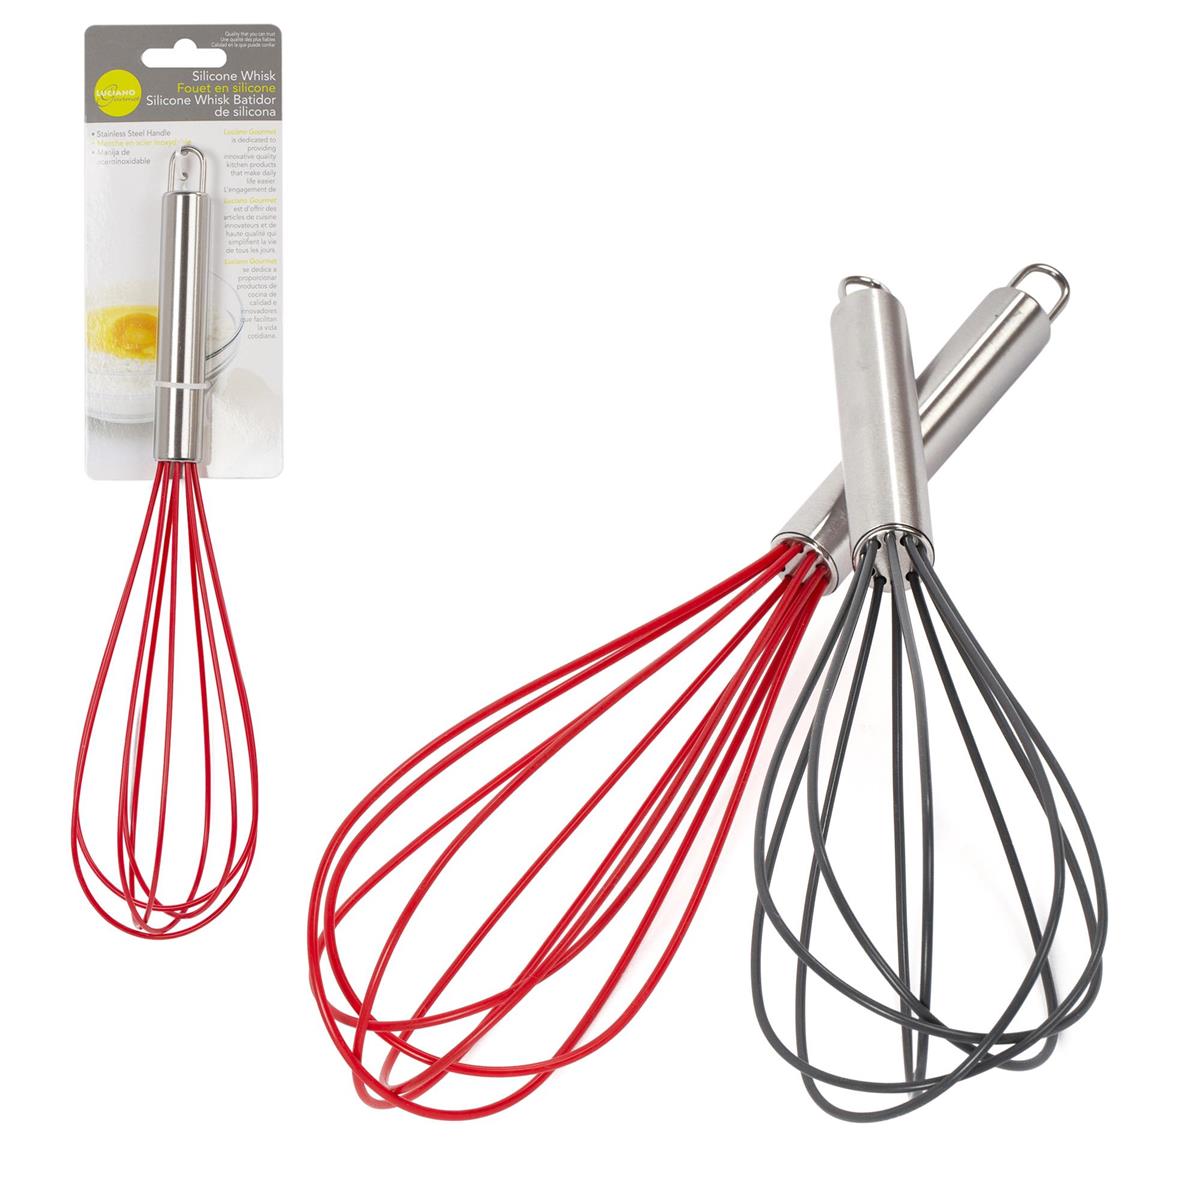 Luciano Silicone Whisk